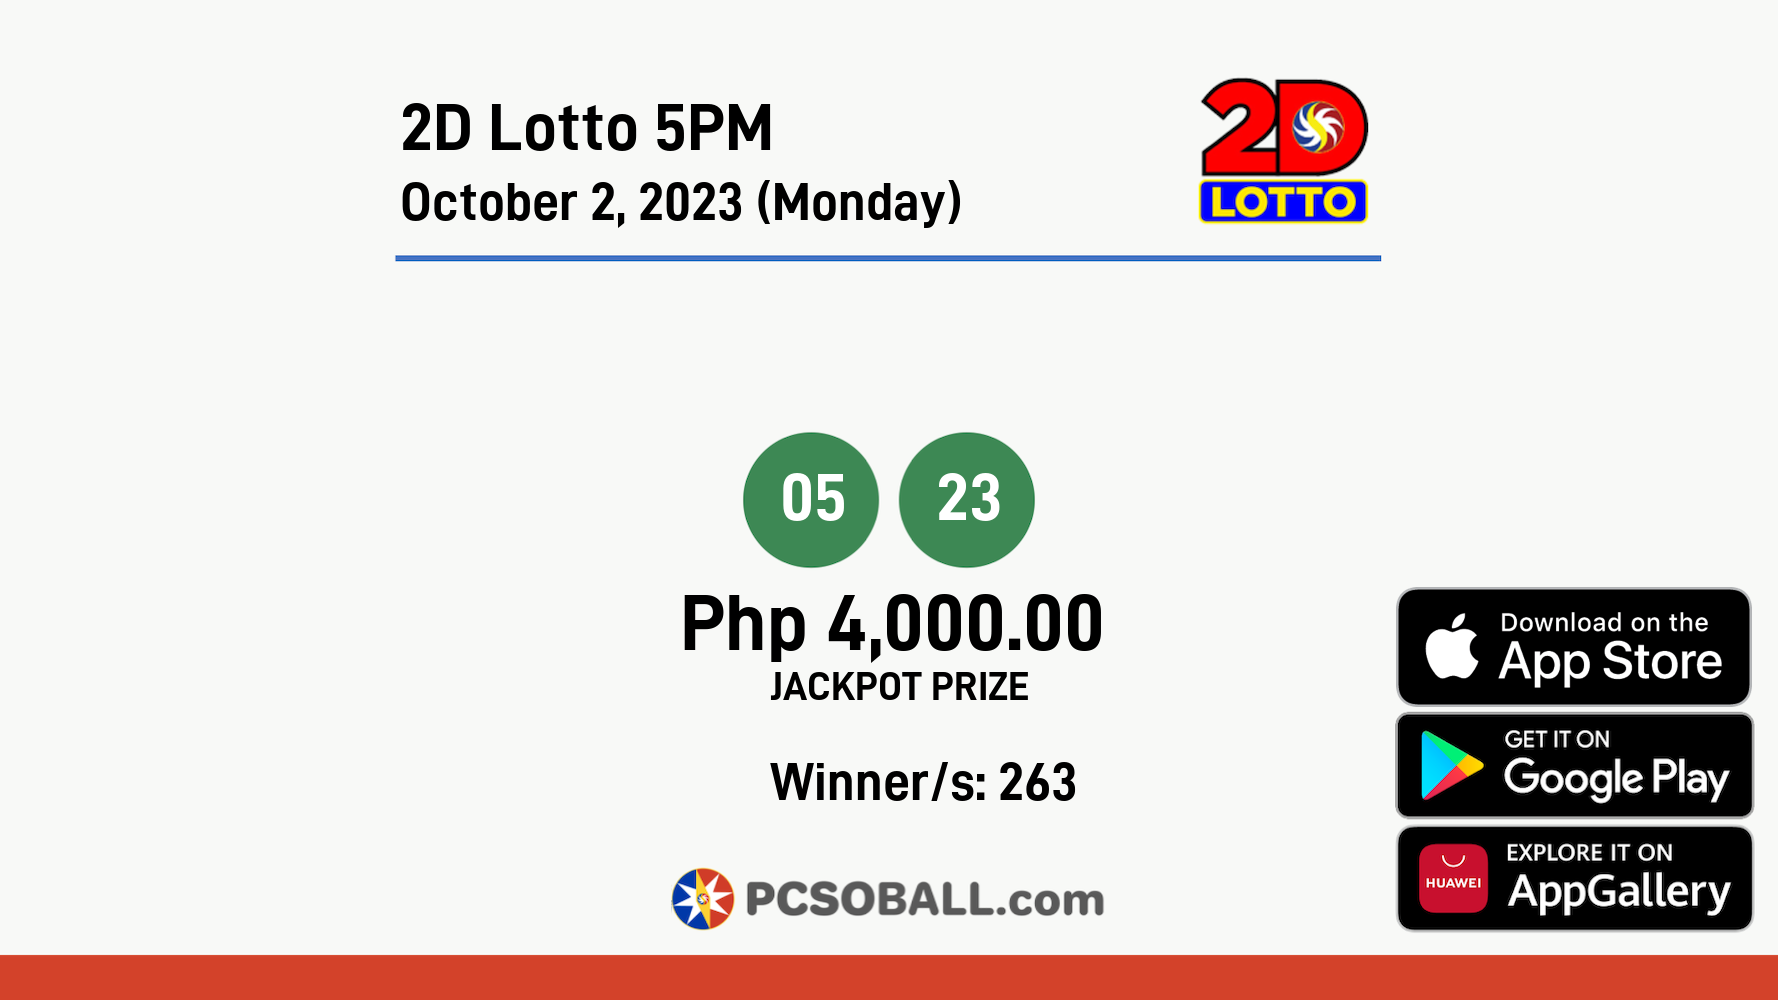 2D Lotto 5PM October 2, 2023 (Monday) Result